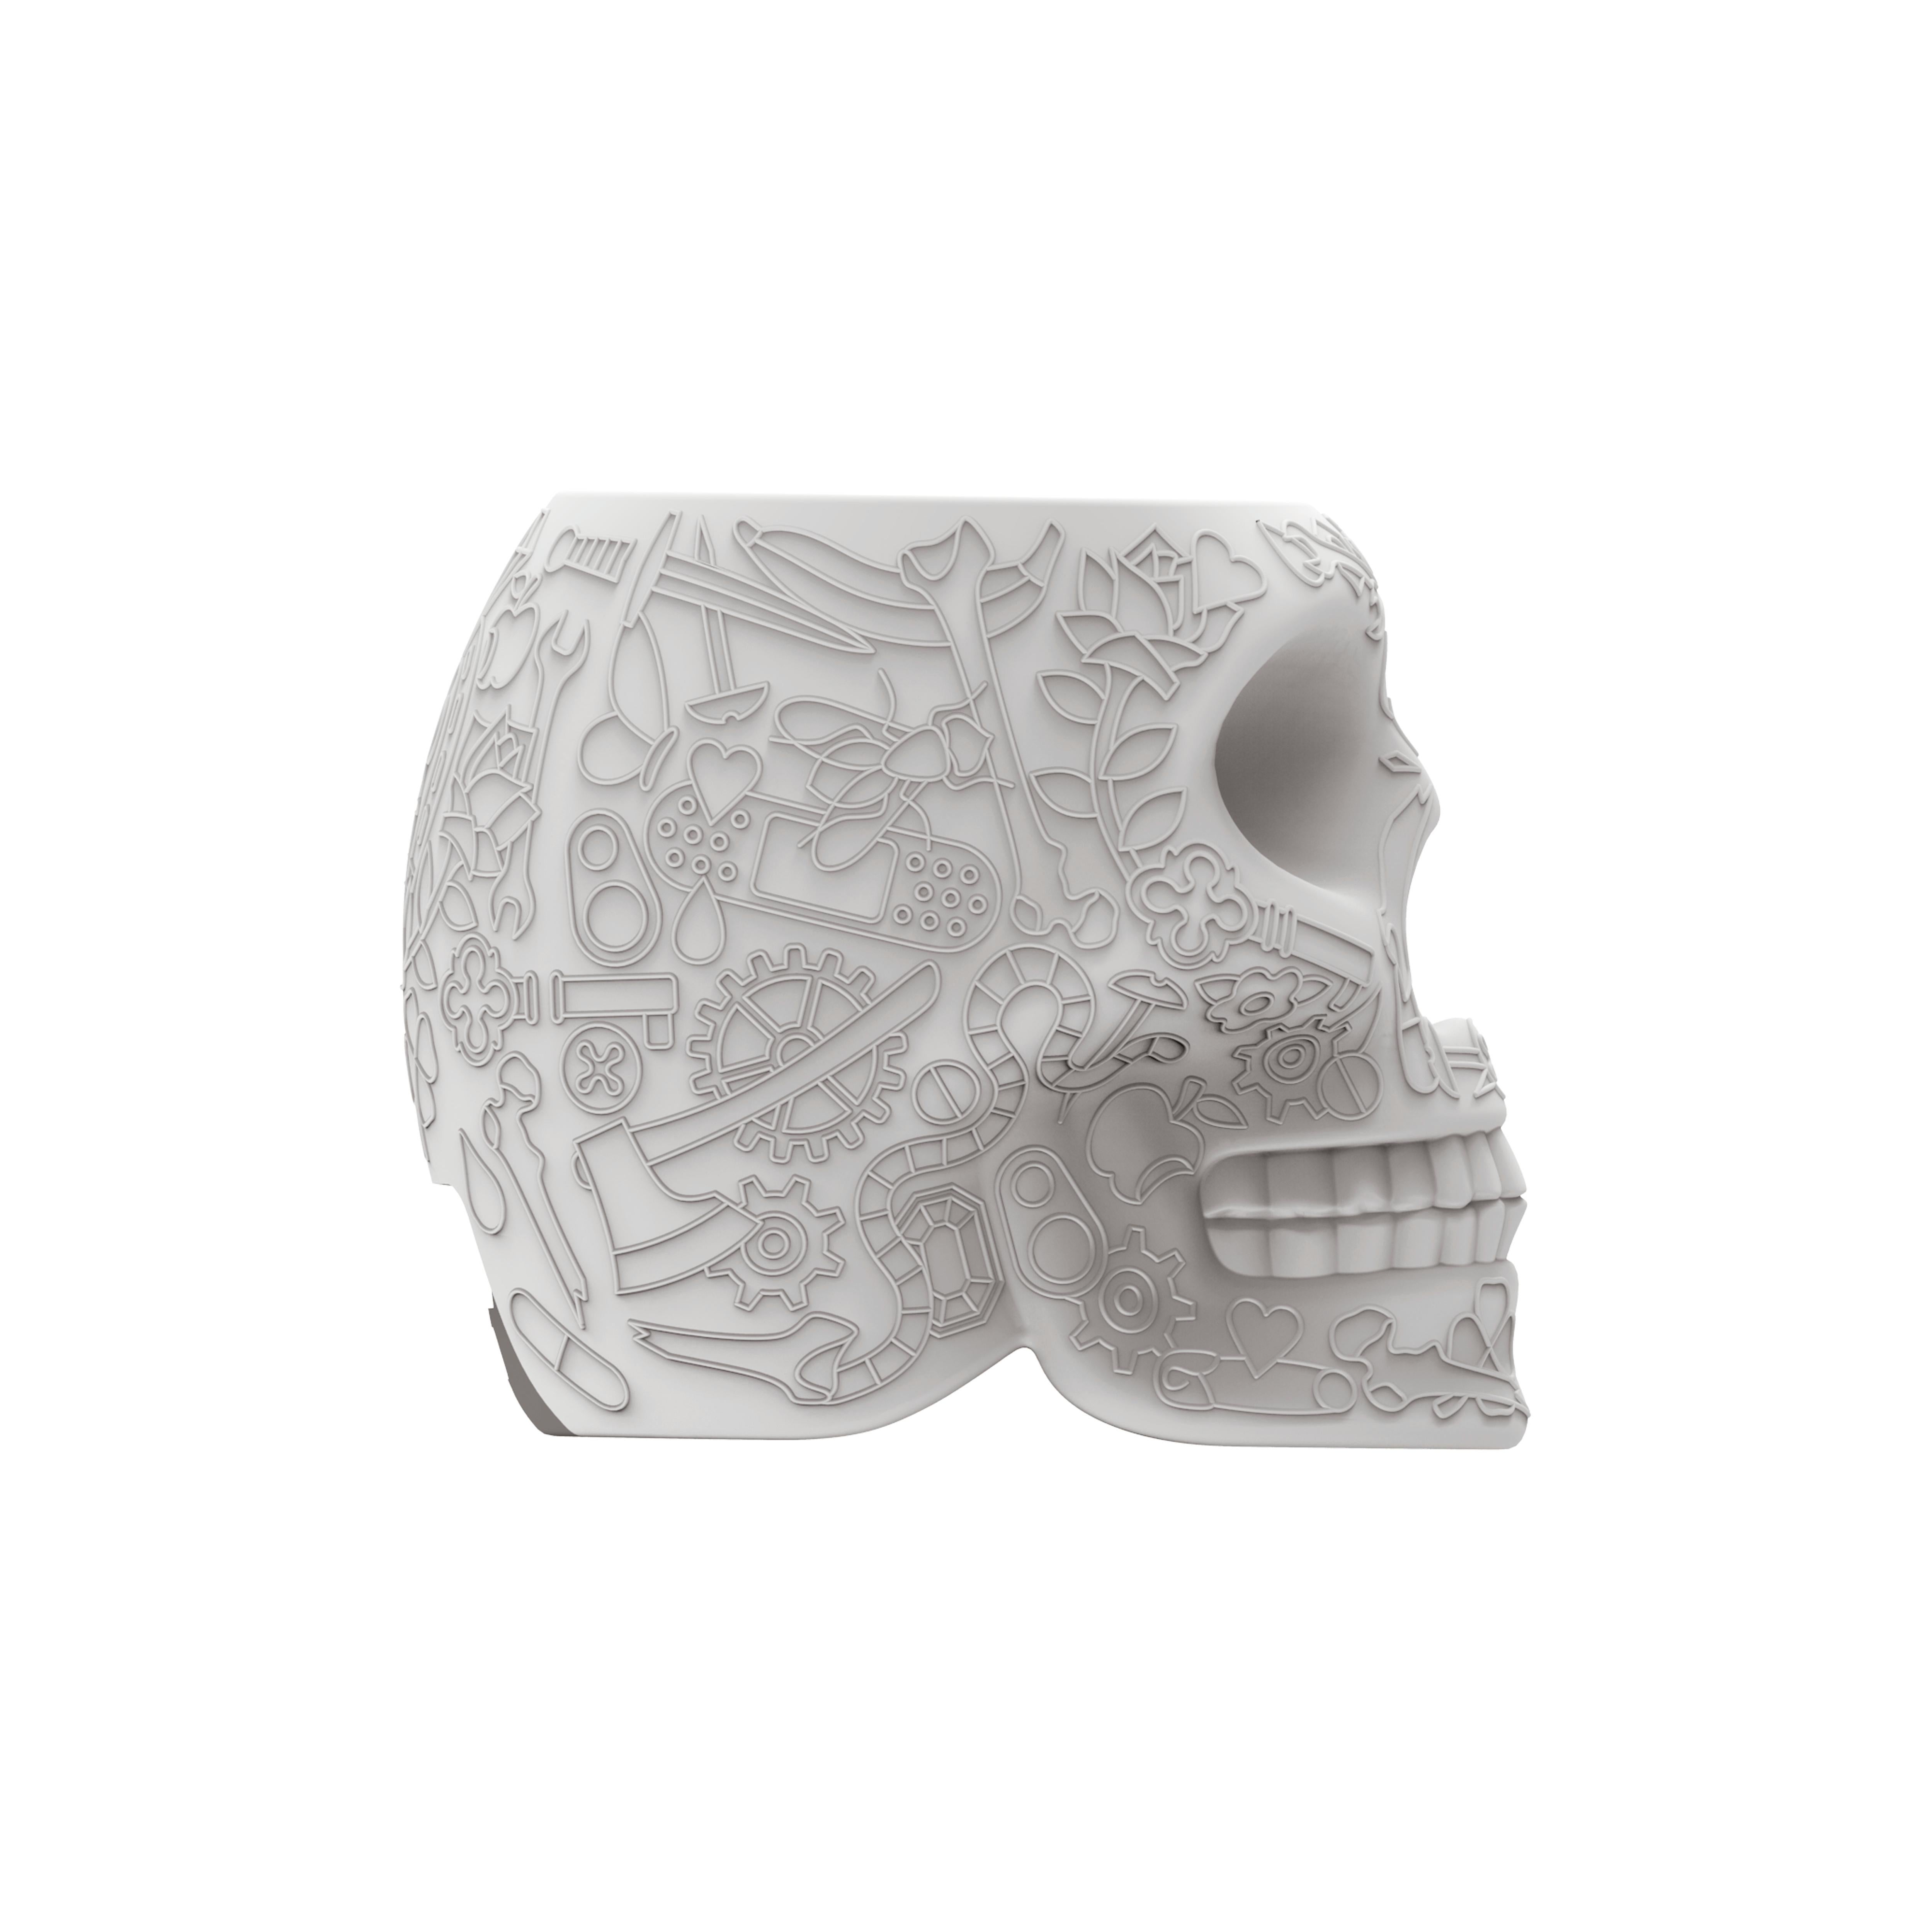 Modern in Stock in Los Angeles, Grey Mexico Skull Mini Portable Charger